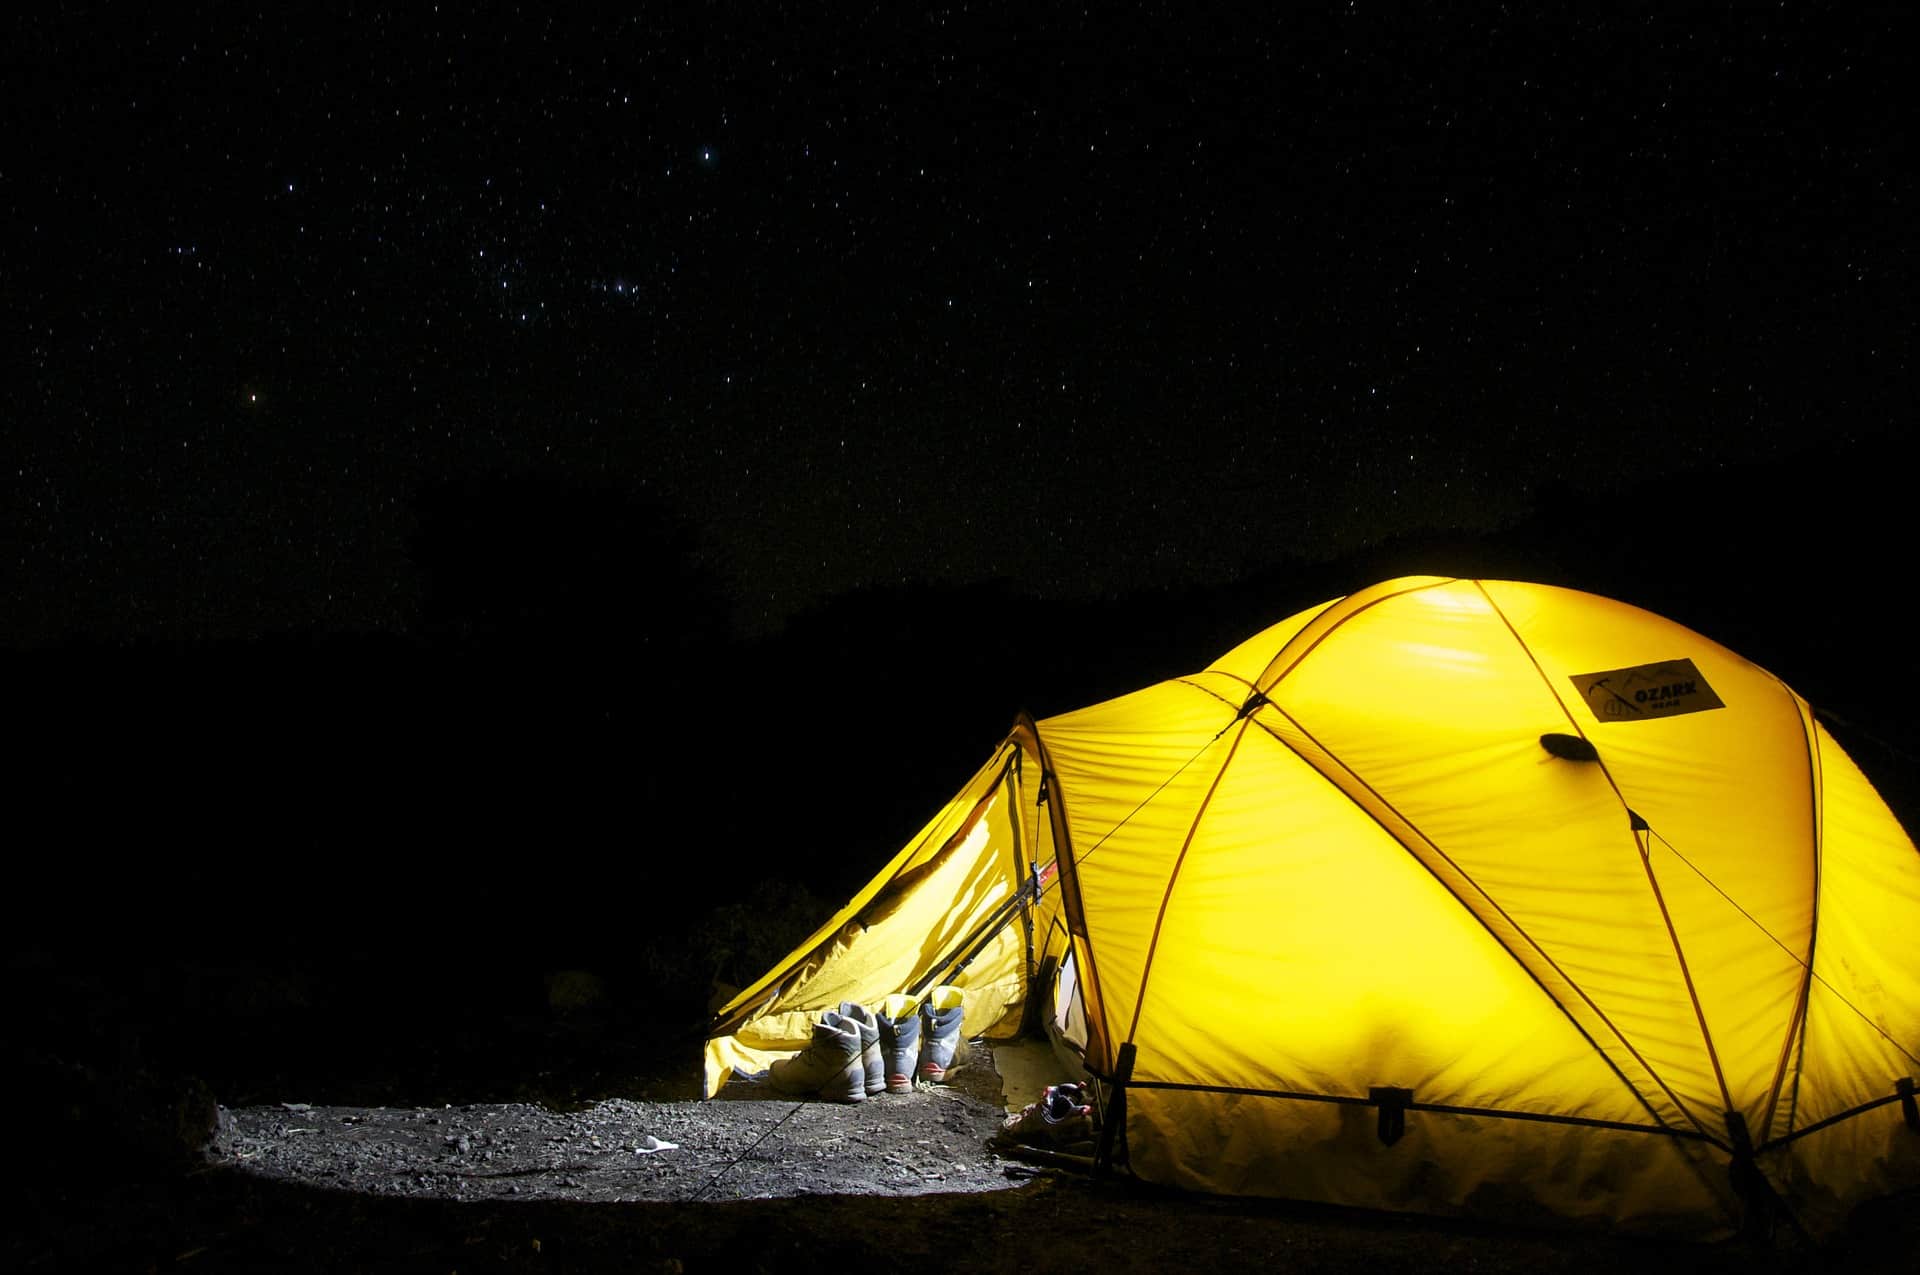 Urban Camping: How to Camp in Your Backyard